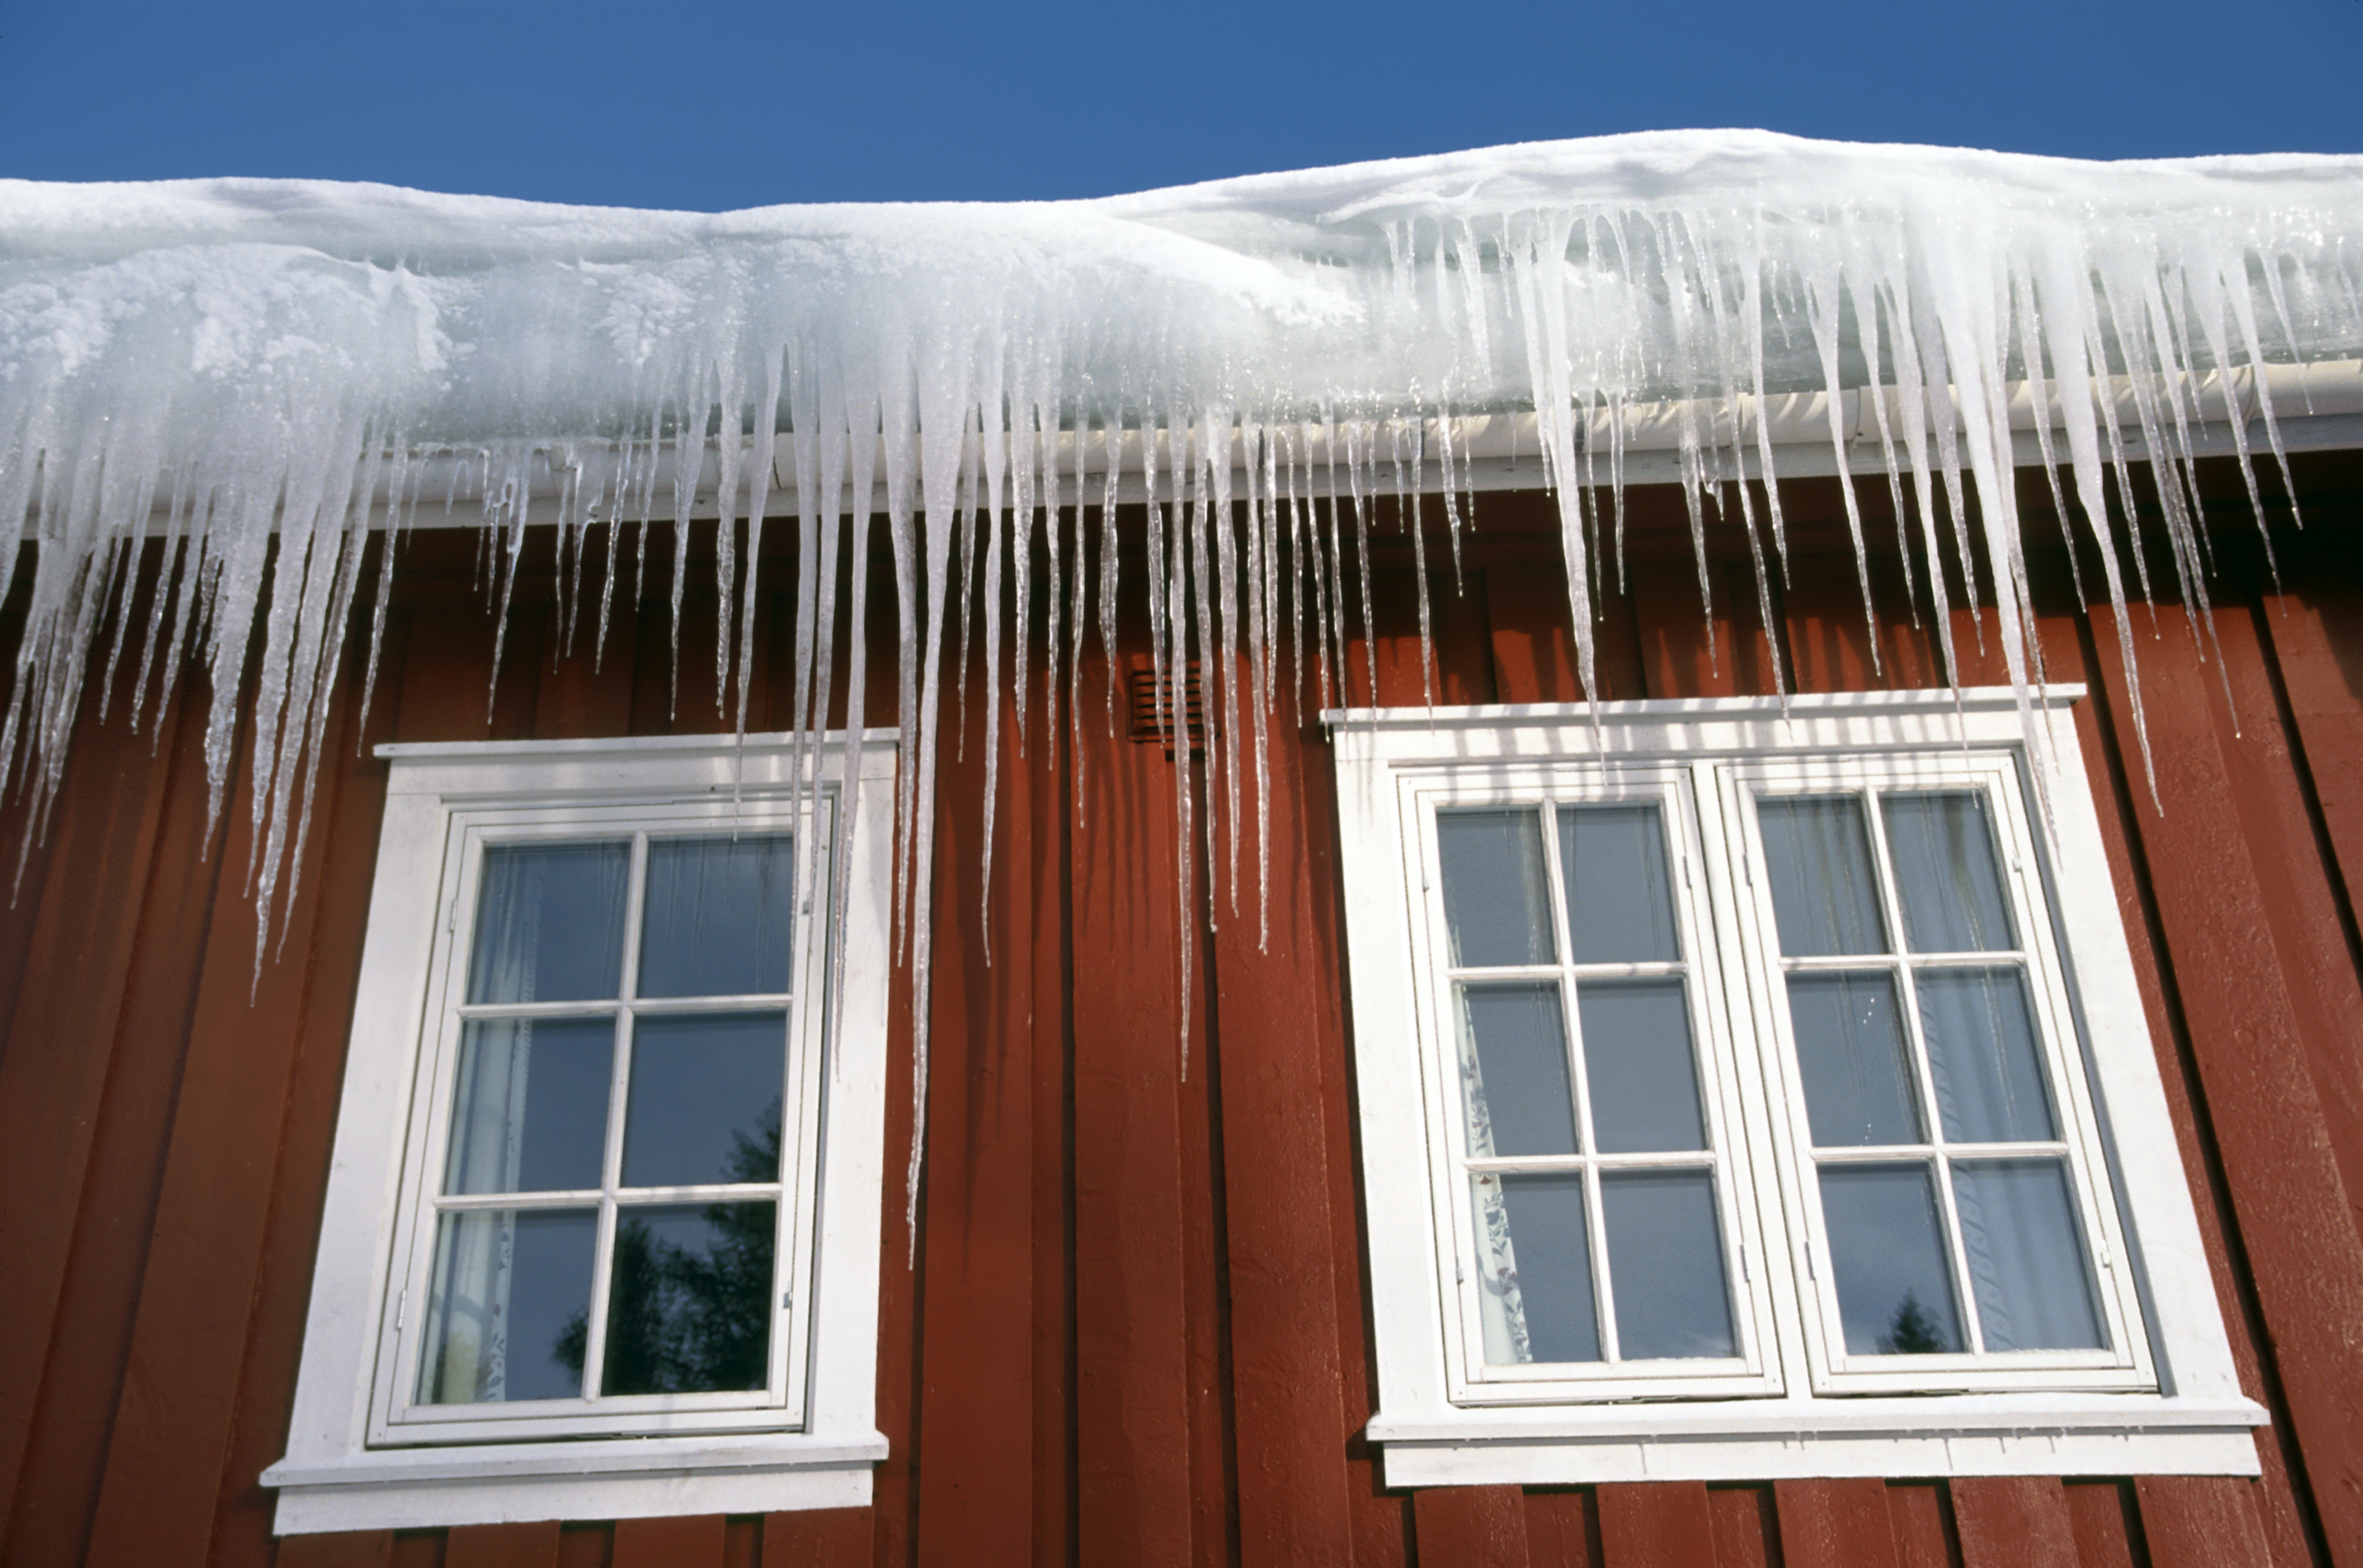 Insulating yourself against the cold & higher energy costs